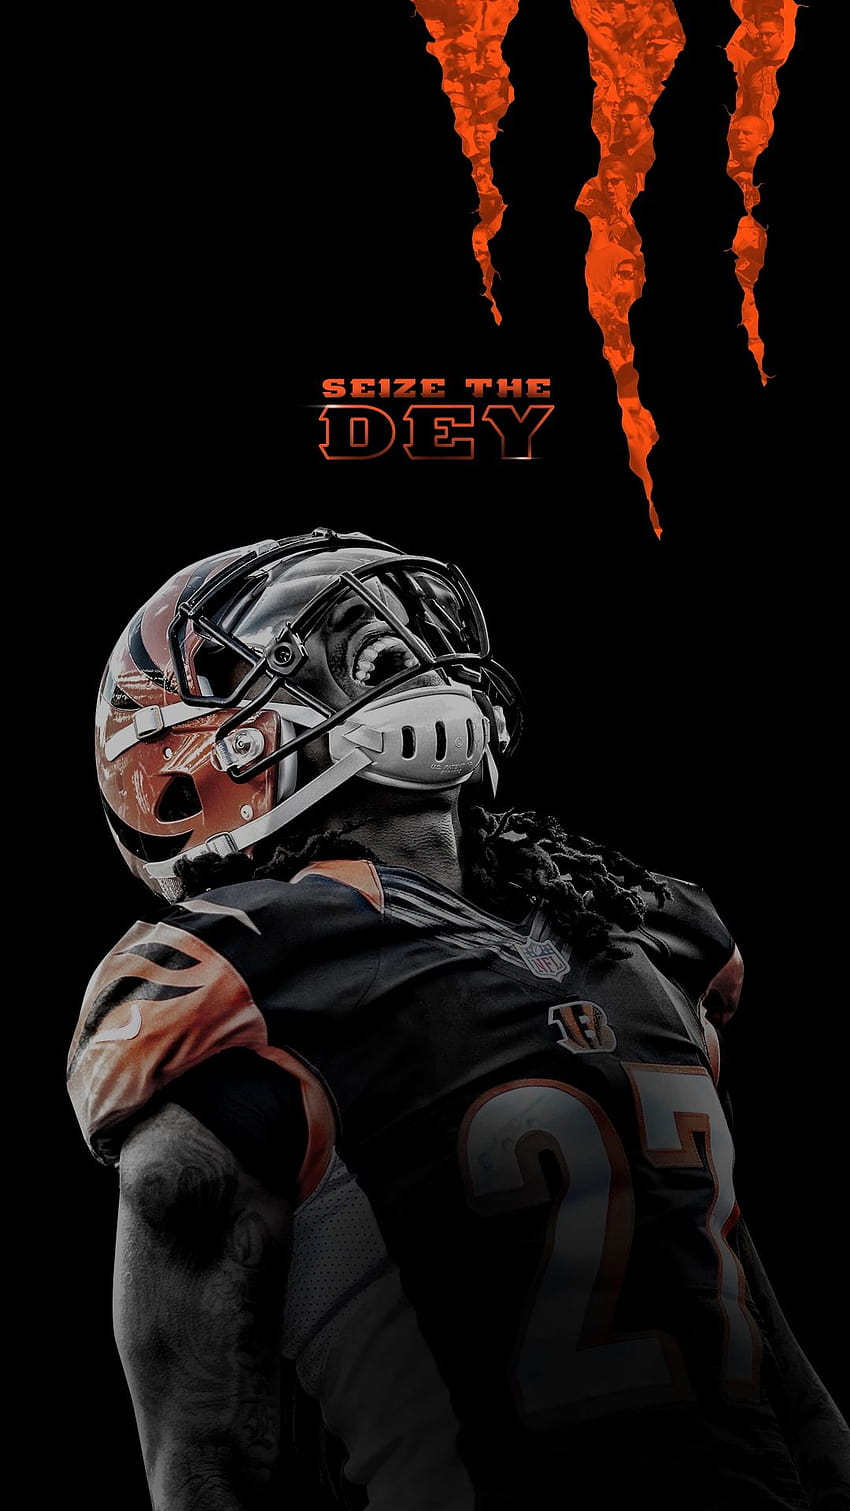 Bengals Backgrounds Awesome Cincinnati Bengals Fans Of the Day, 벵골 전화 HD 전화 배경 화면